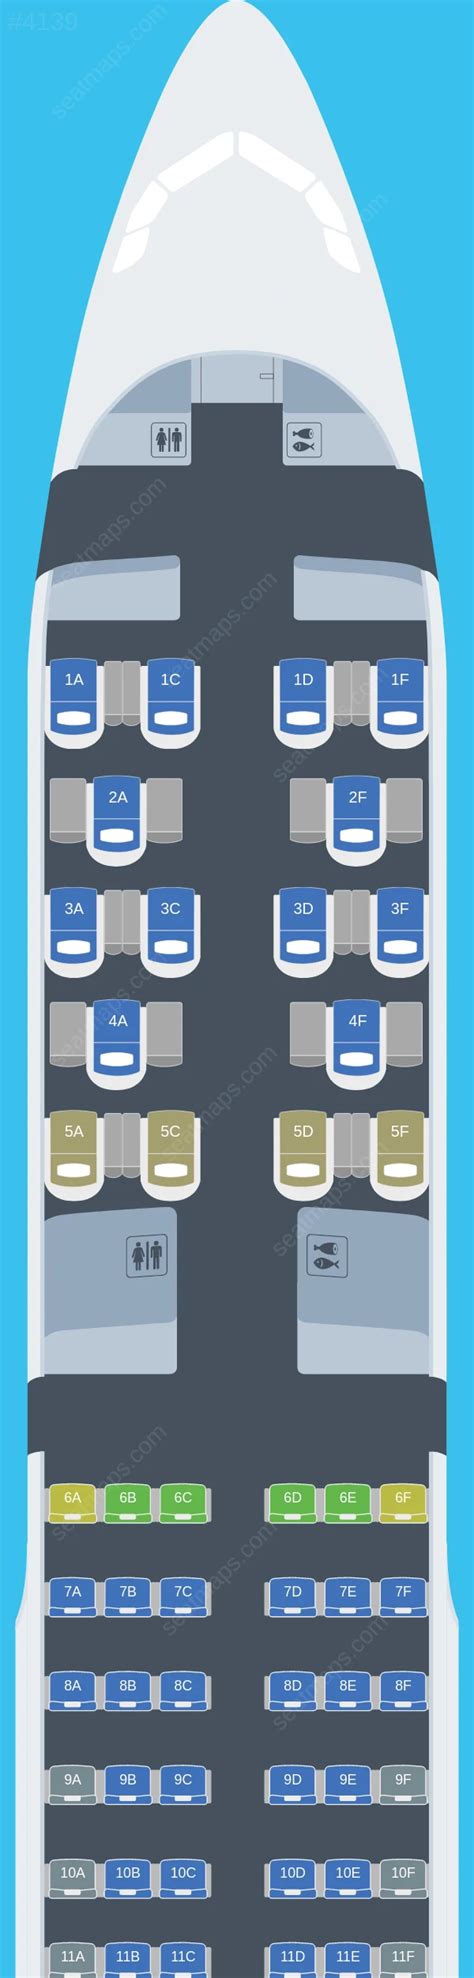 Jetblue Airways Airbus A Seat Map Updated Find The Best Hot Sex Picture